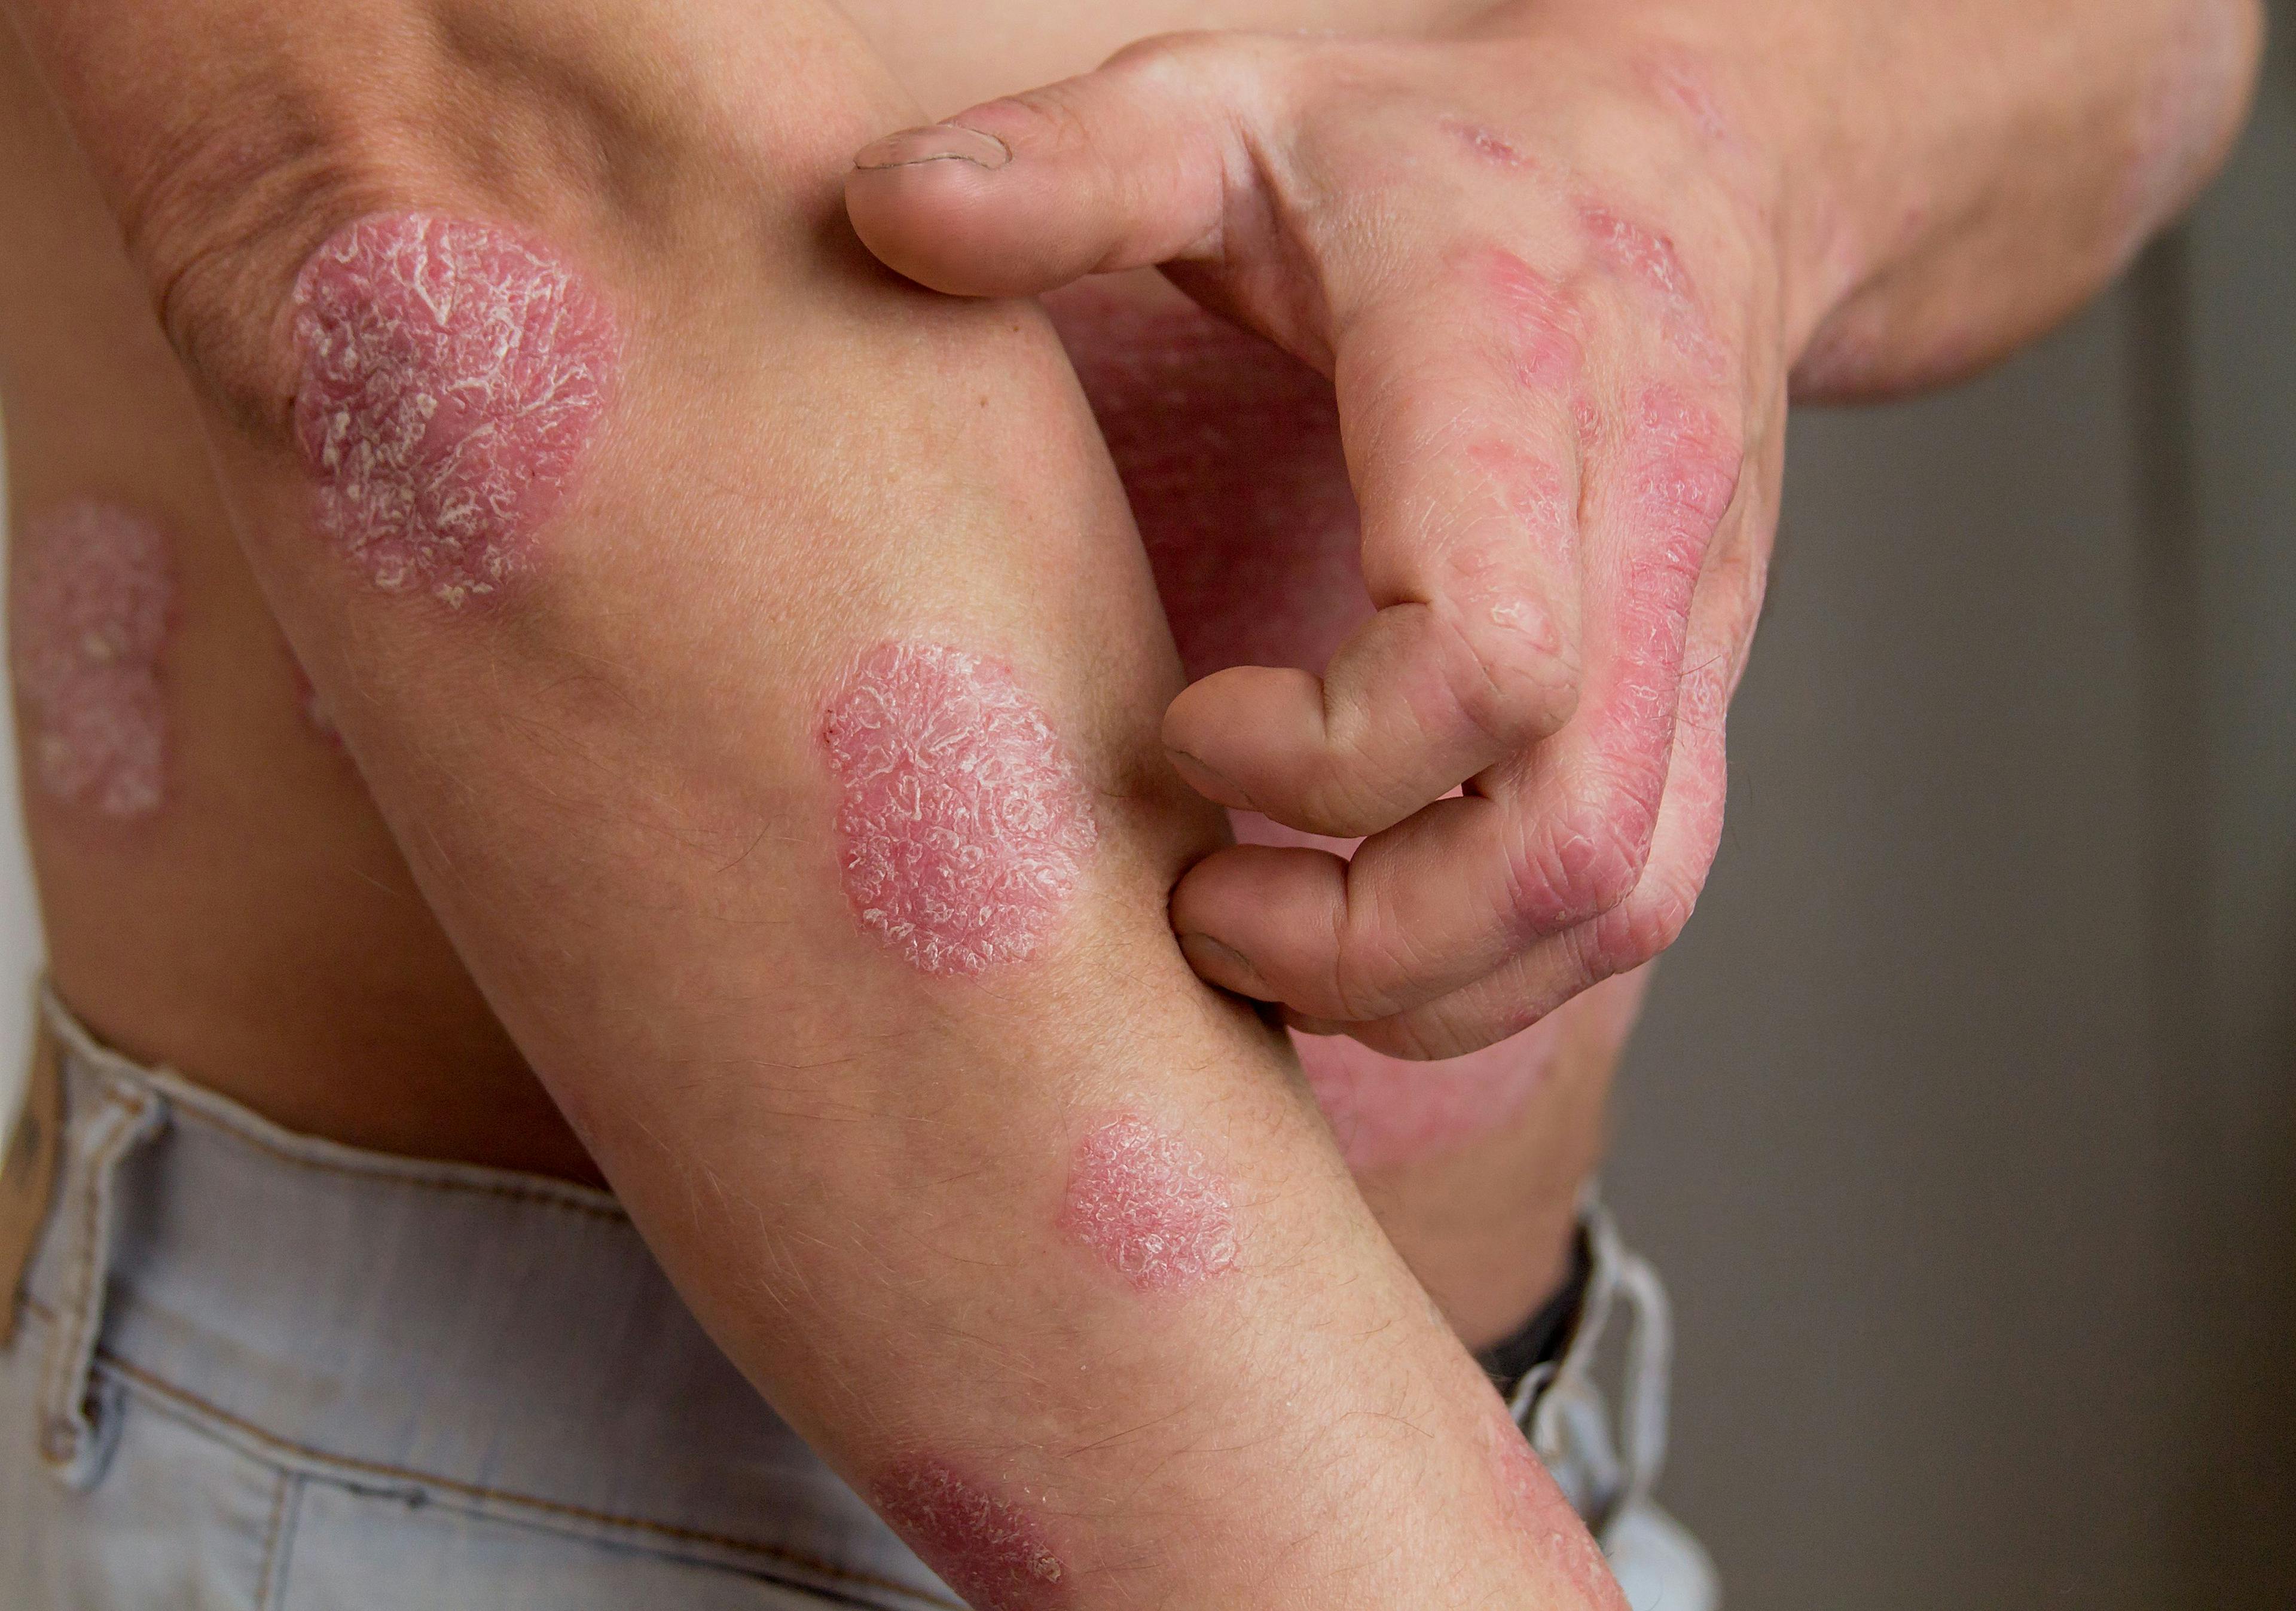 Man with psoriasis on the hands, arm, and abdomen